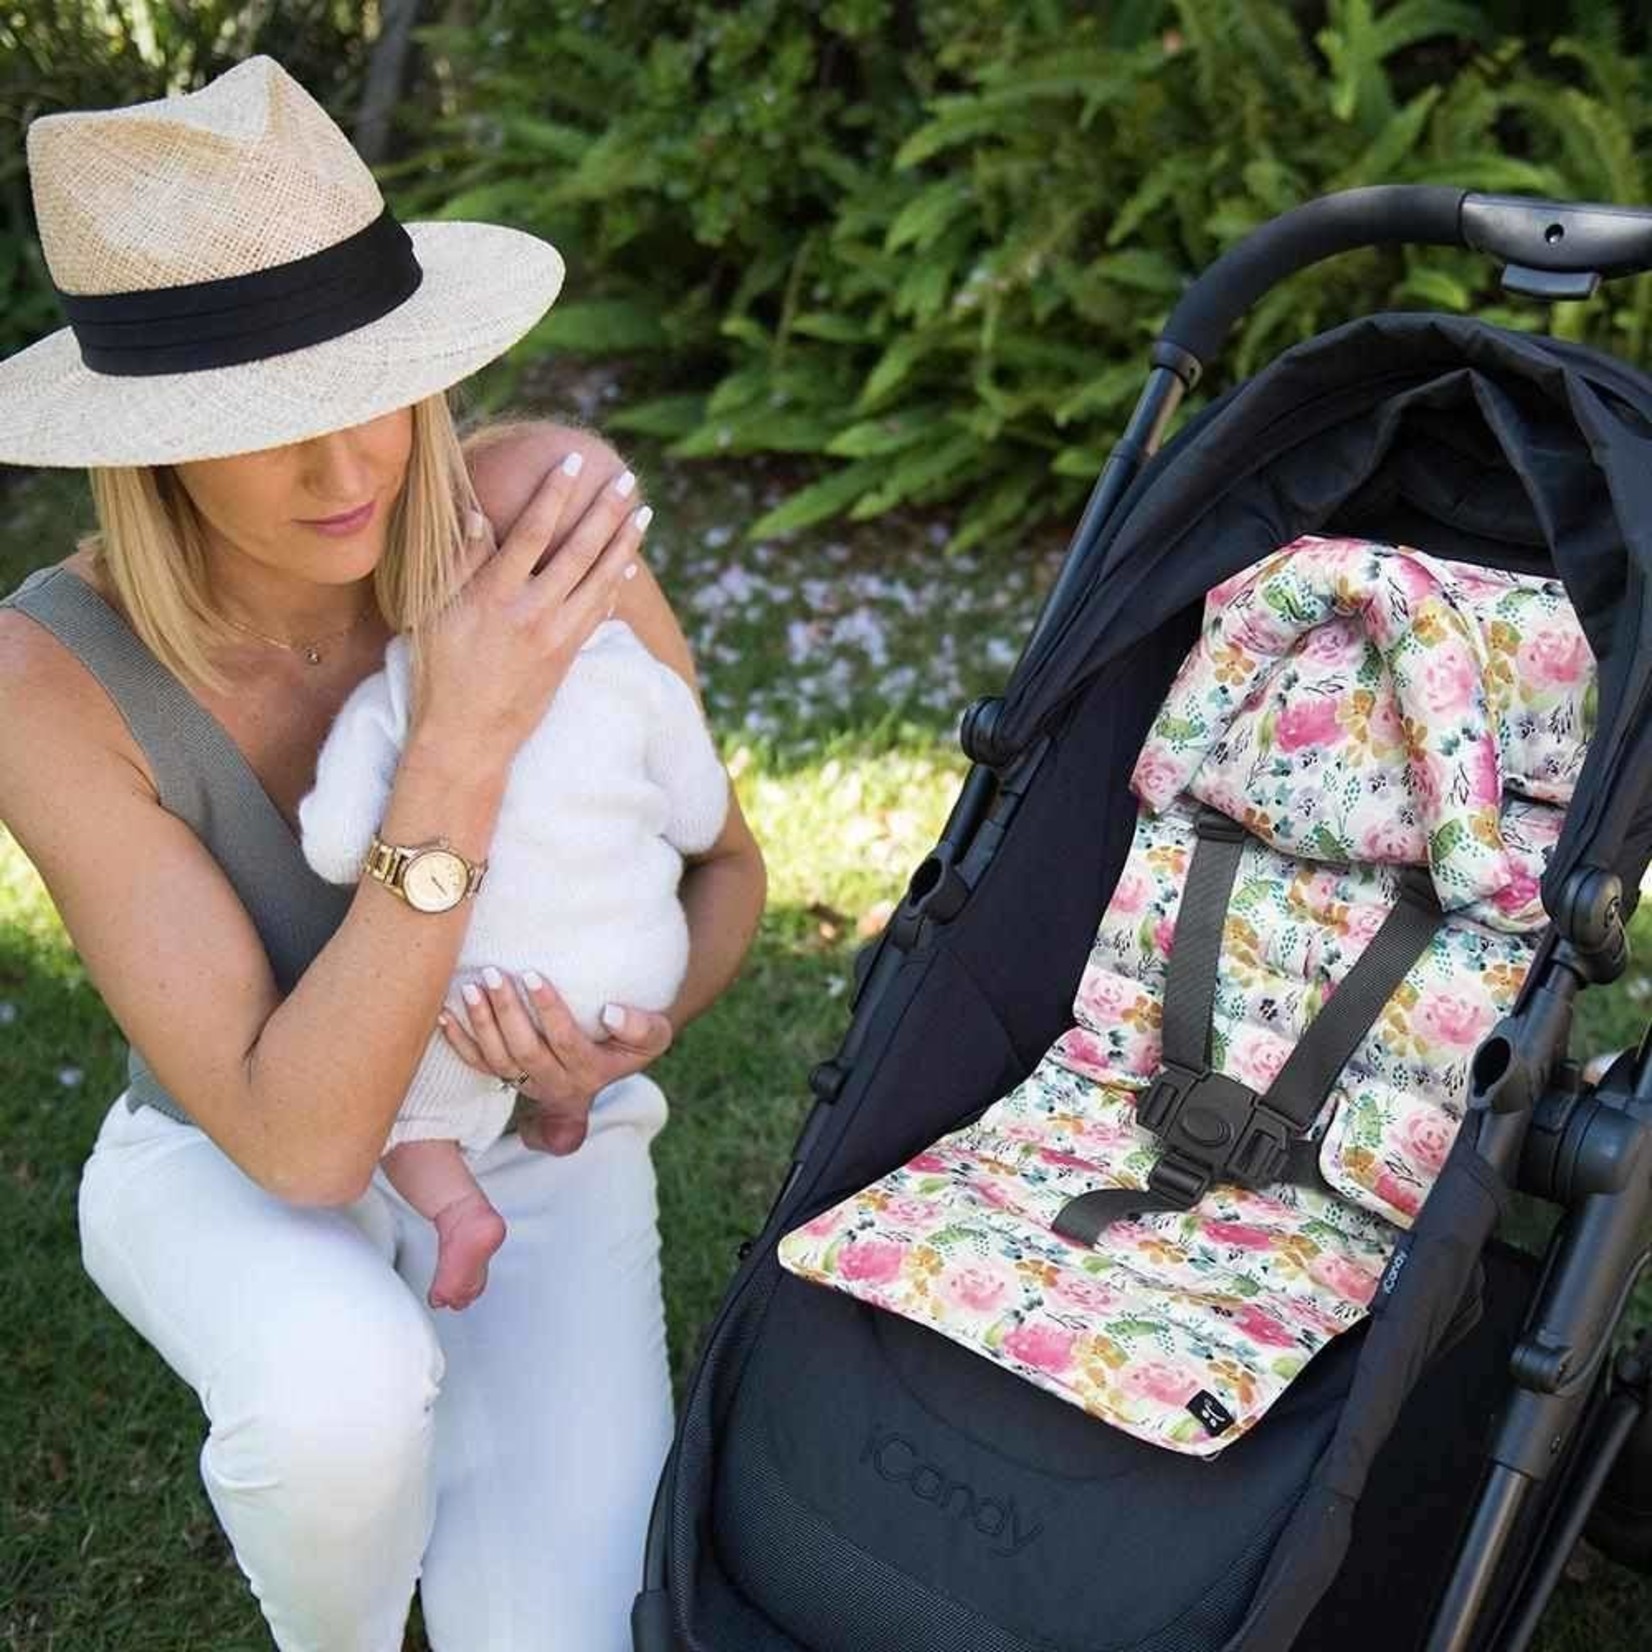 Outlookbaby Mini Pram Liner with adjustable head support - Floral Delight